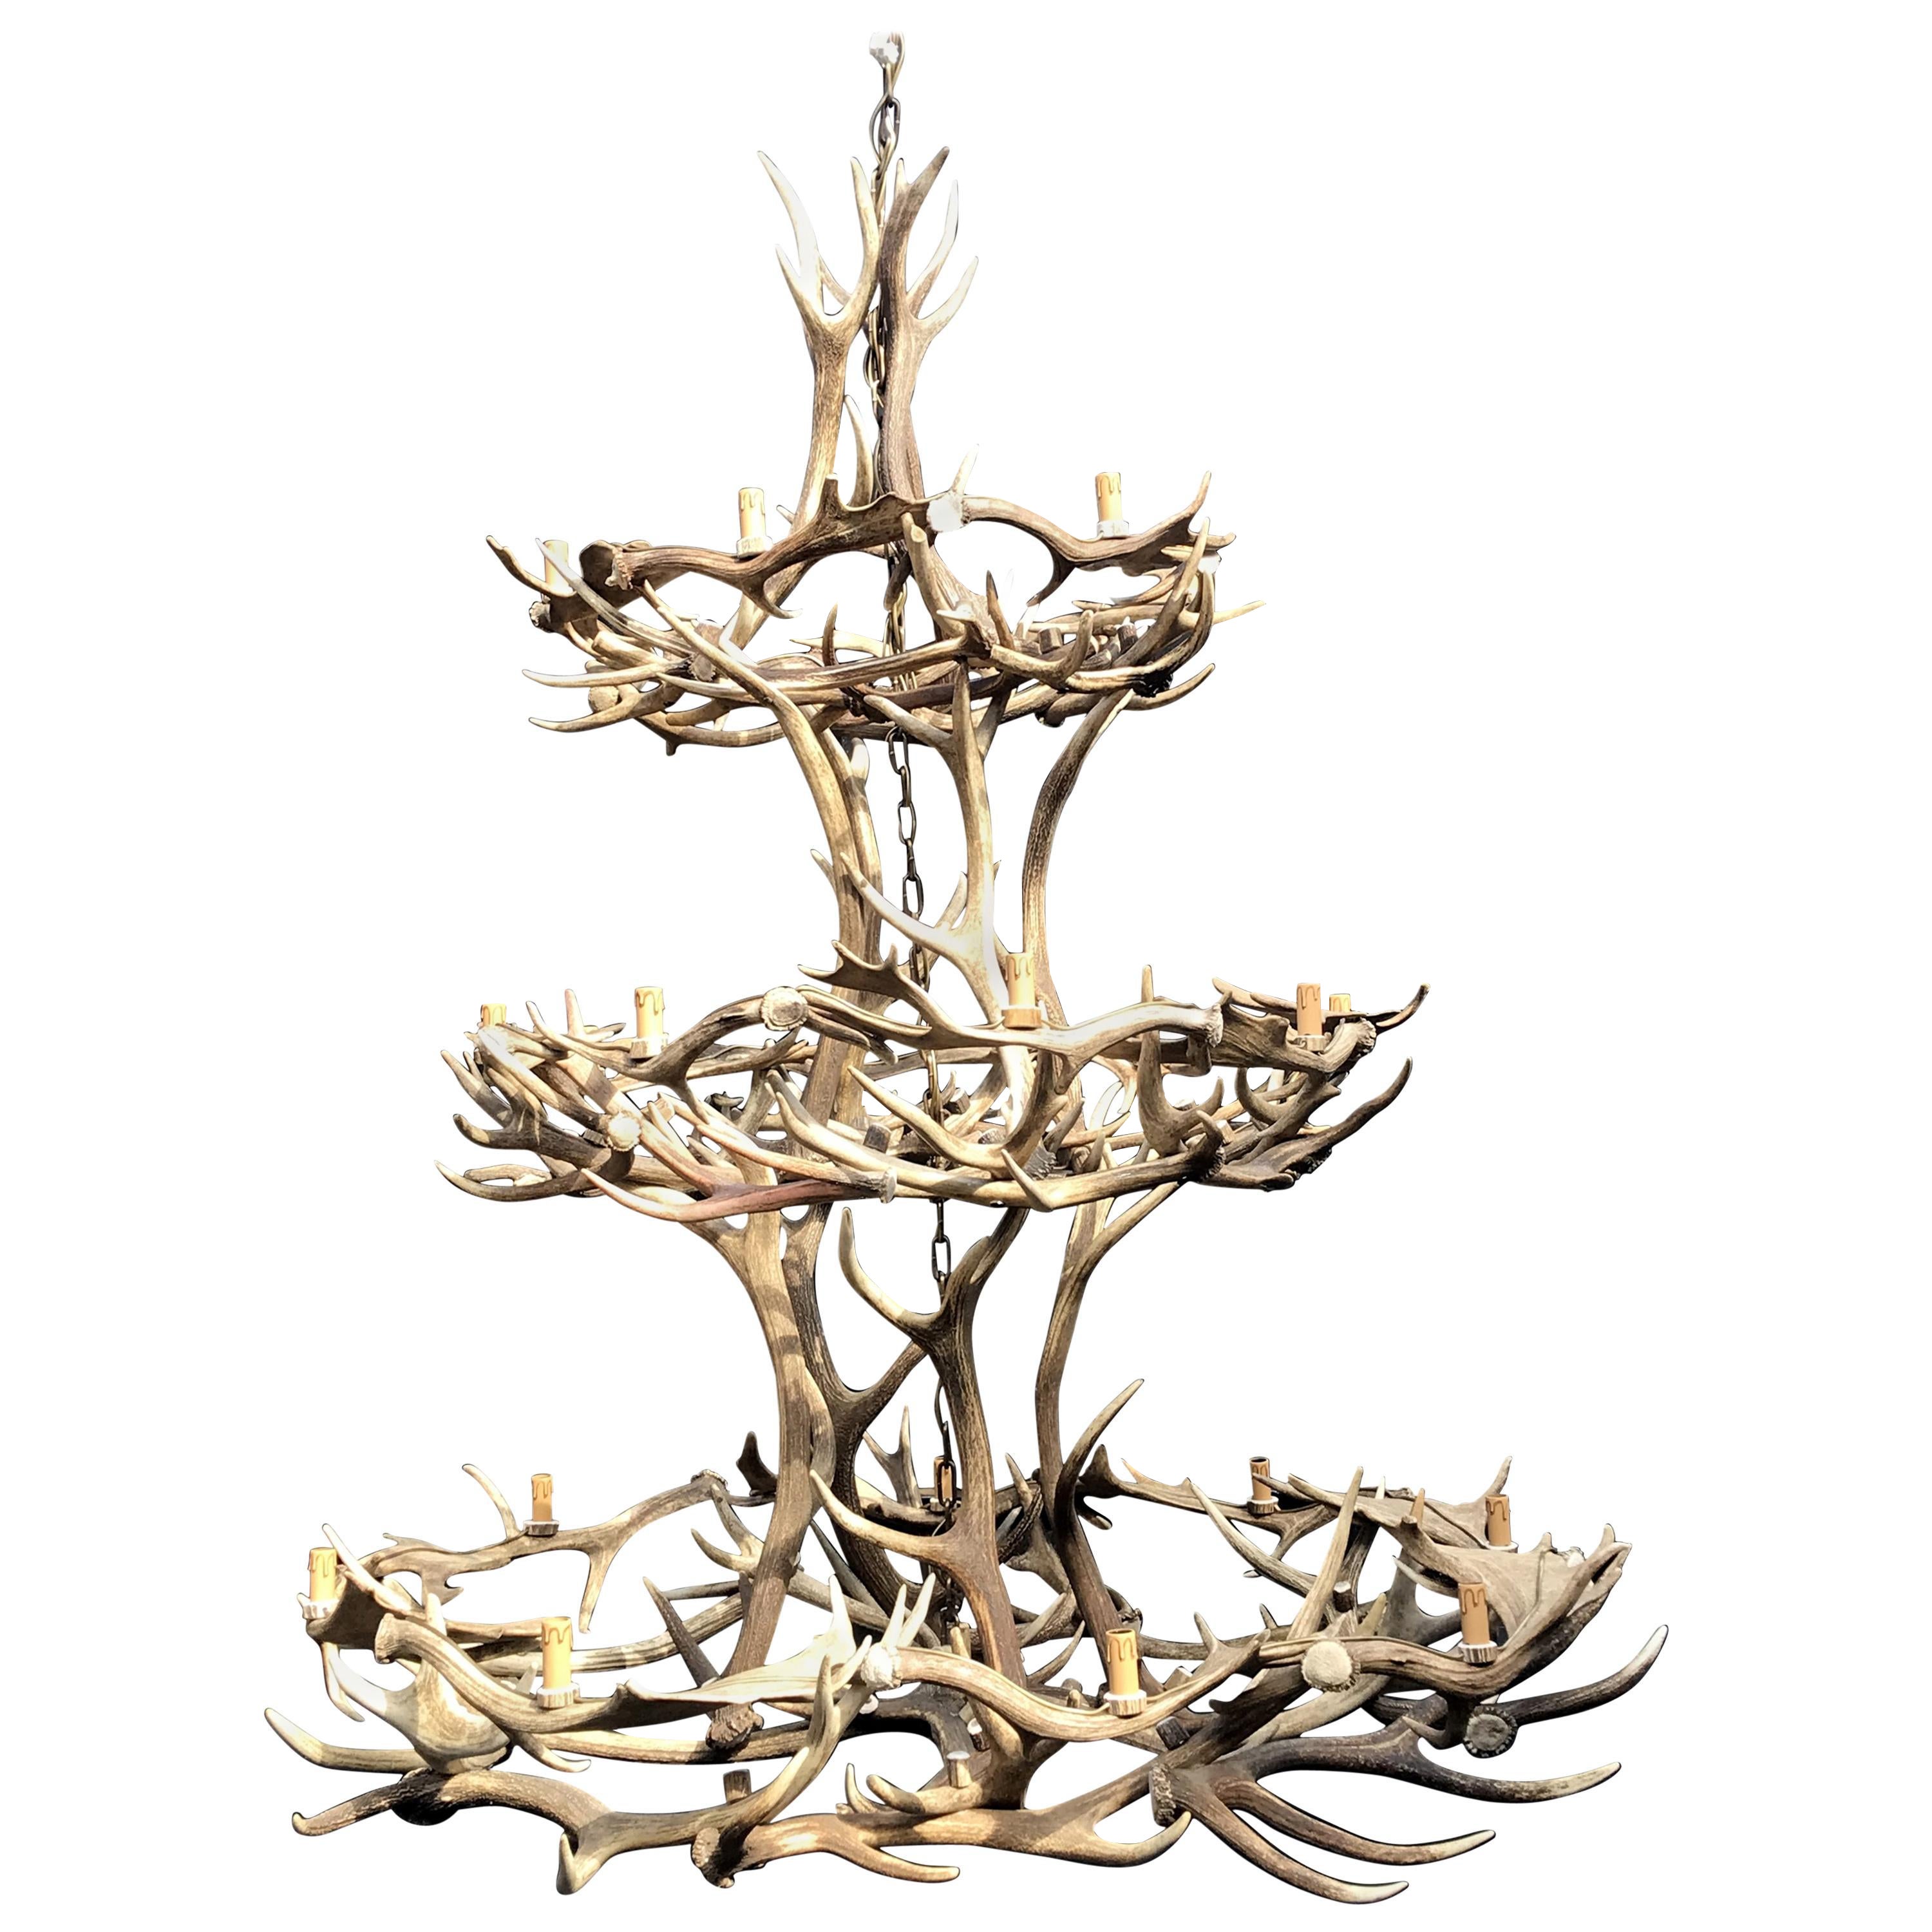 Imposing Chandelier Made of Antlers For Sale